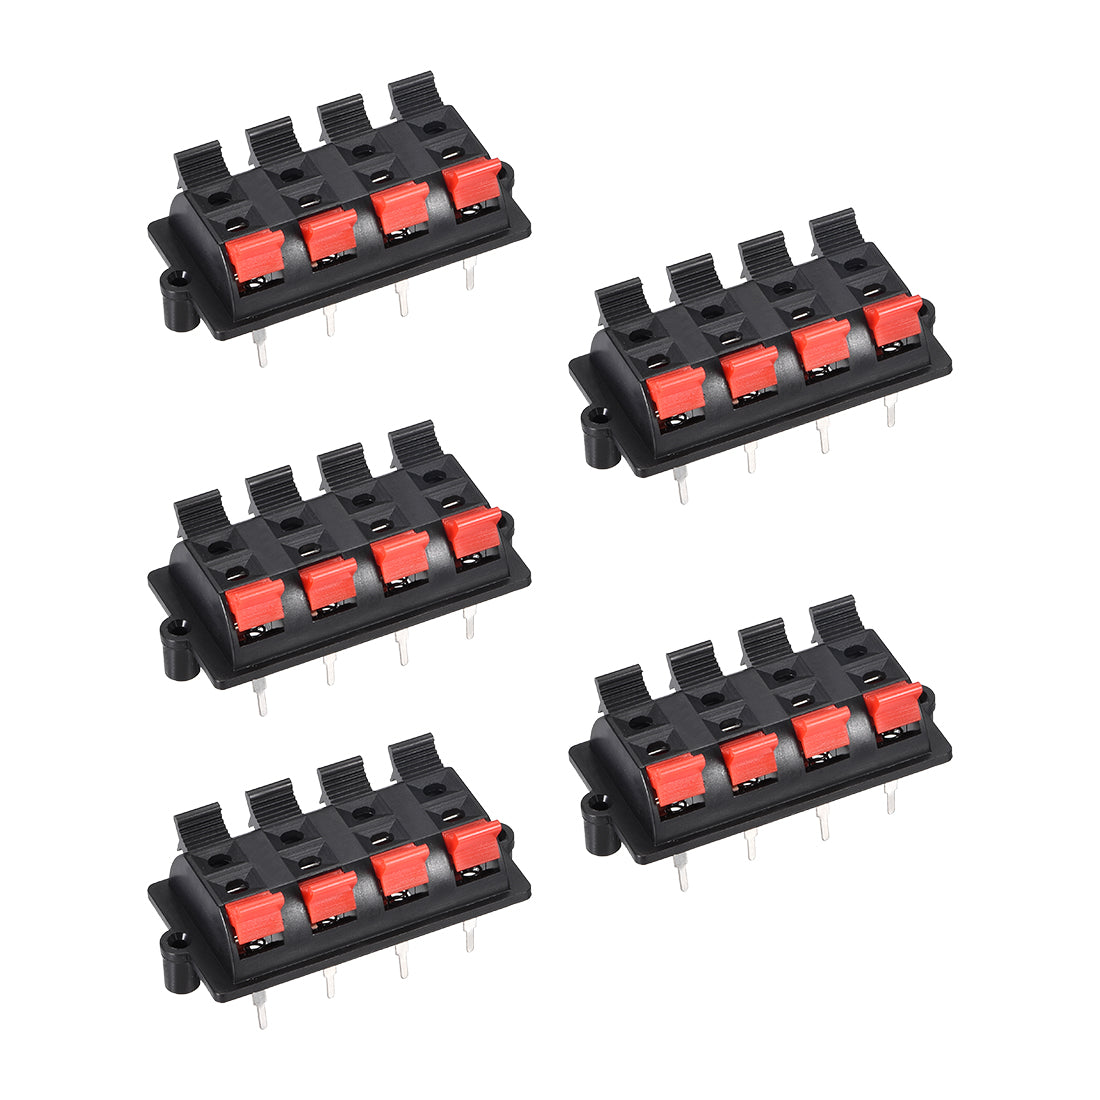 uxcell Uxcell 2 Row 8 Way Spring Speaker Terminal Clip Push Release Connector Audio Cable Terminals Strip Block WP8-03 5Pcs